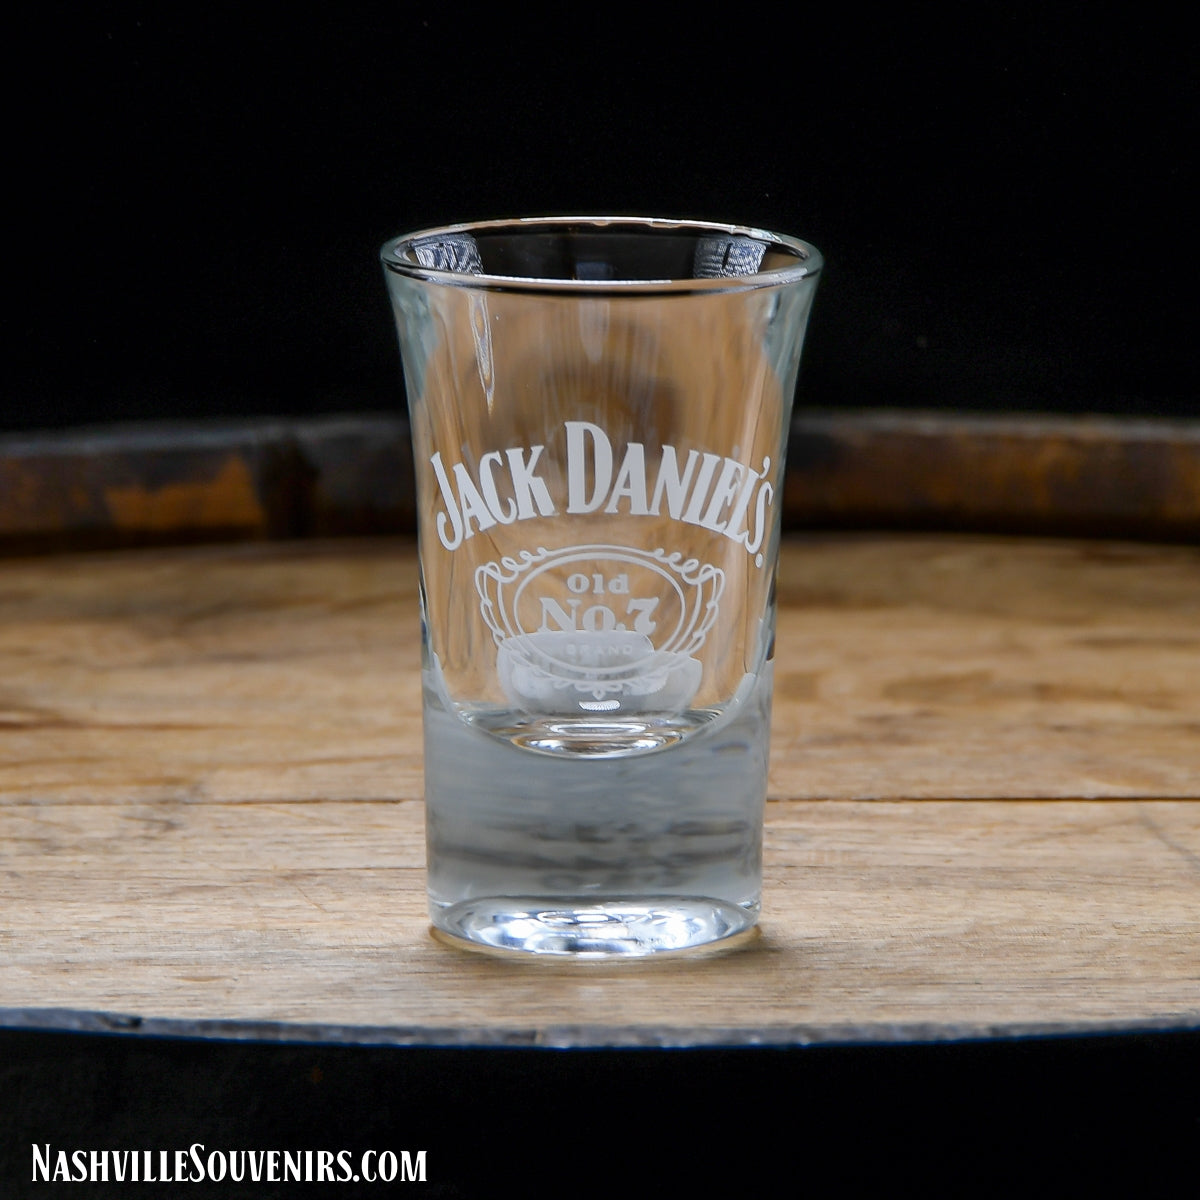 Officially licensed Jack Daniels White Logo Old No.7 Tapered Shot Glass. Get yours today with FREE SHIPPING on all US orders over $75!